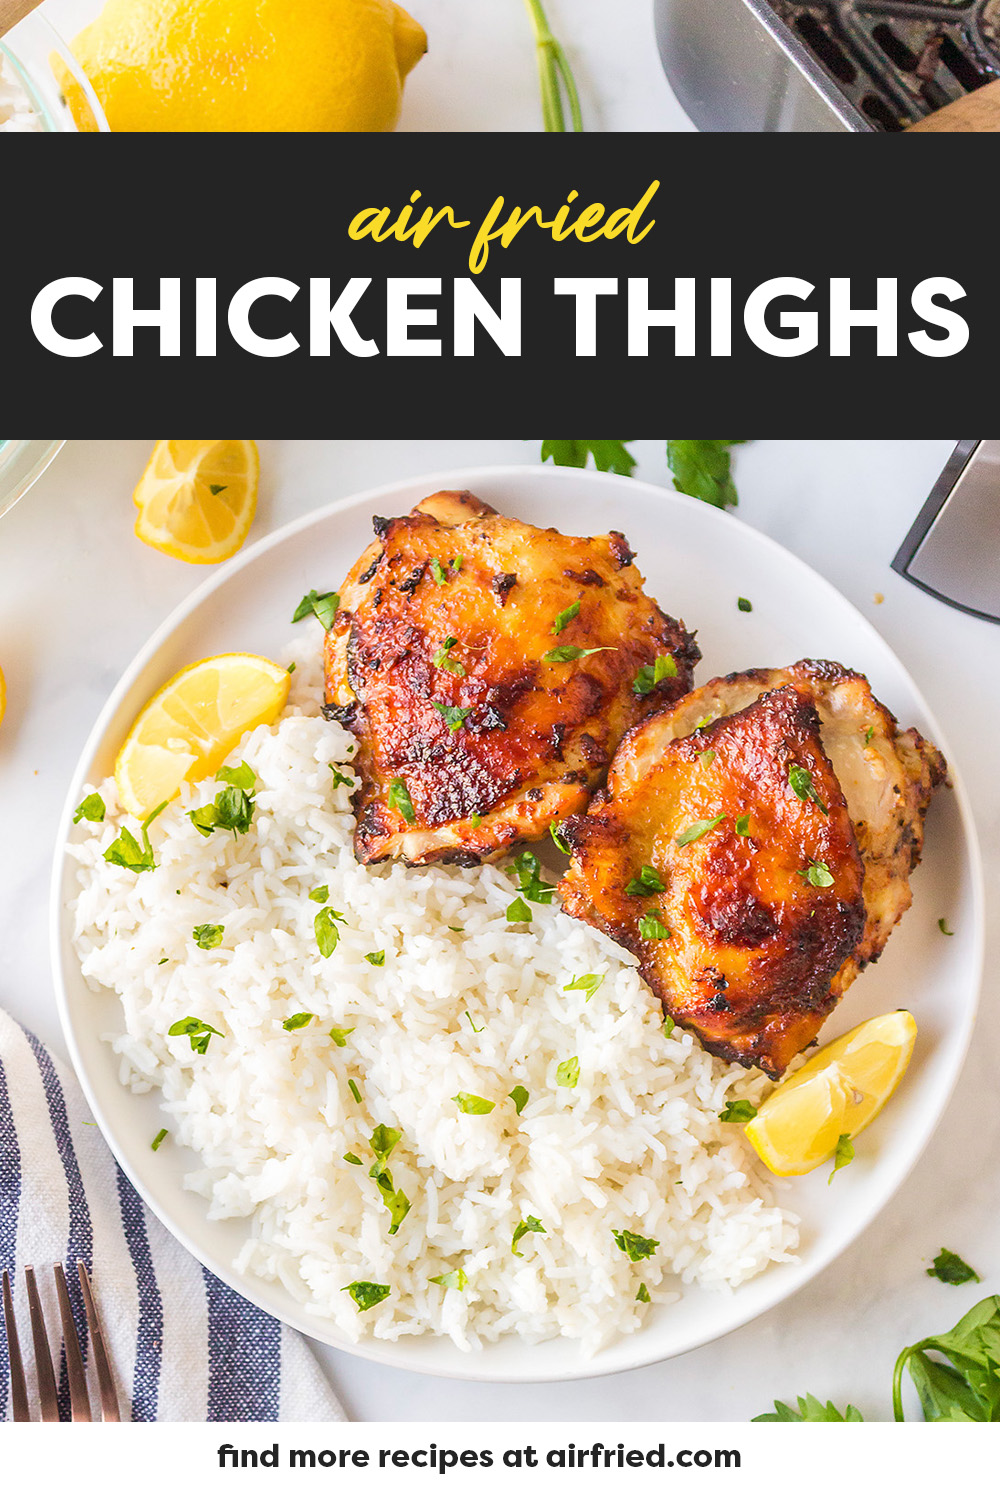 Chicken thighs and rice on a plate.